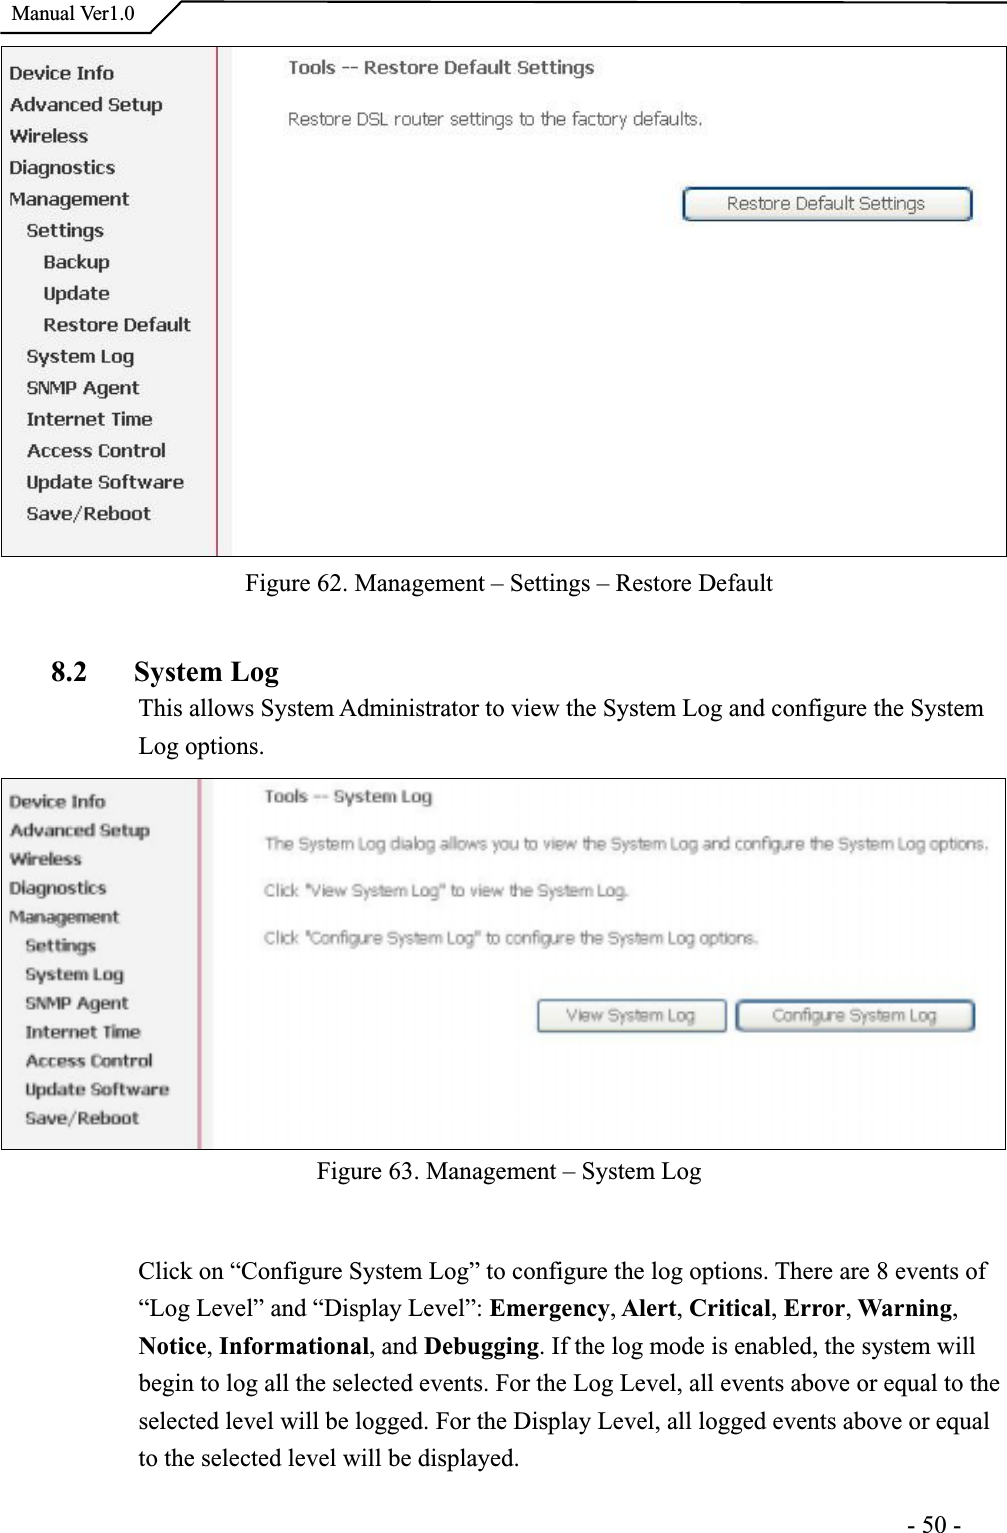  Manual Ver1.0Figure 62. Management – Settings – Restore Default8.2 System LogThis allows System Administrator to view the System Log and configure the SystemLog options. Figure 63. Management – System Log Click on “Configure System Log” to configure the log options. There are 8 events of “Log Level” and “Display Level”: Emergency, Alert, Critical, Error, Warning,Notice, Informational, and Debugging. If the log mode is enabled, the system will begin to log all the selected events. For the Log Level, all events above or equal to the selected level will be logged. For the Display Level, all logged events above or equal to the selected level will be displayed.                                                                     -50-